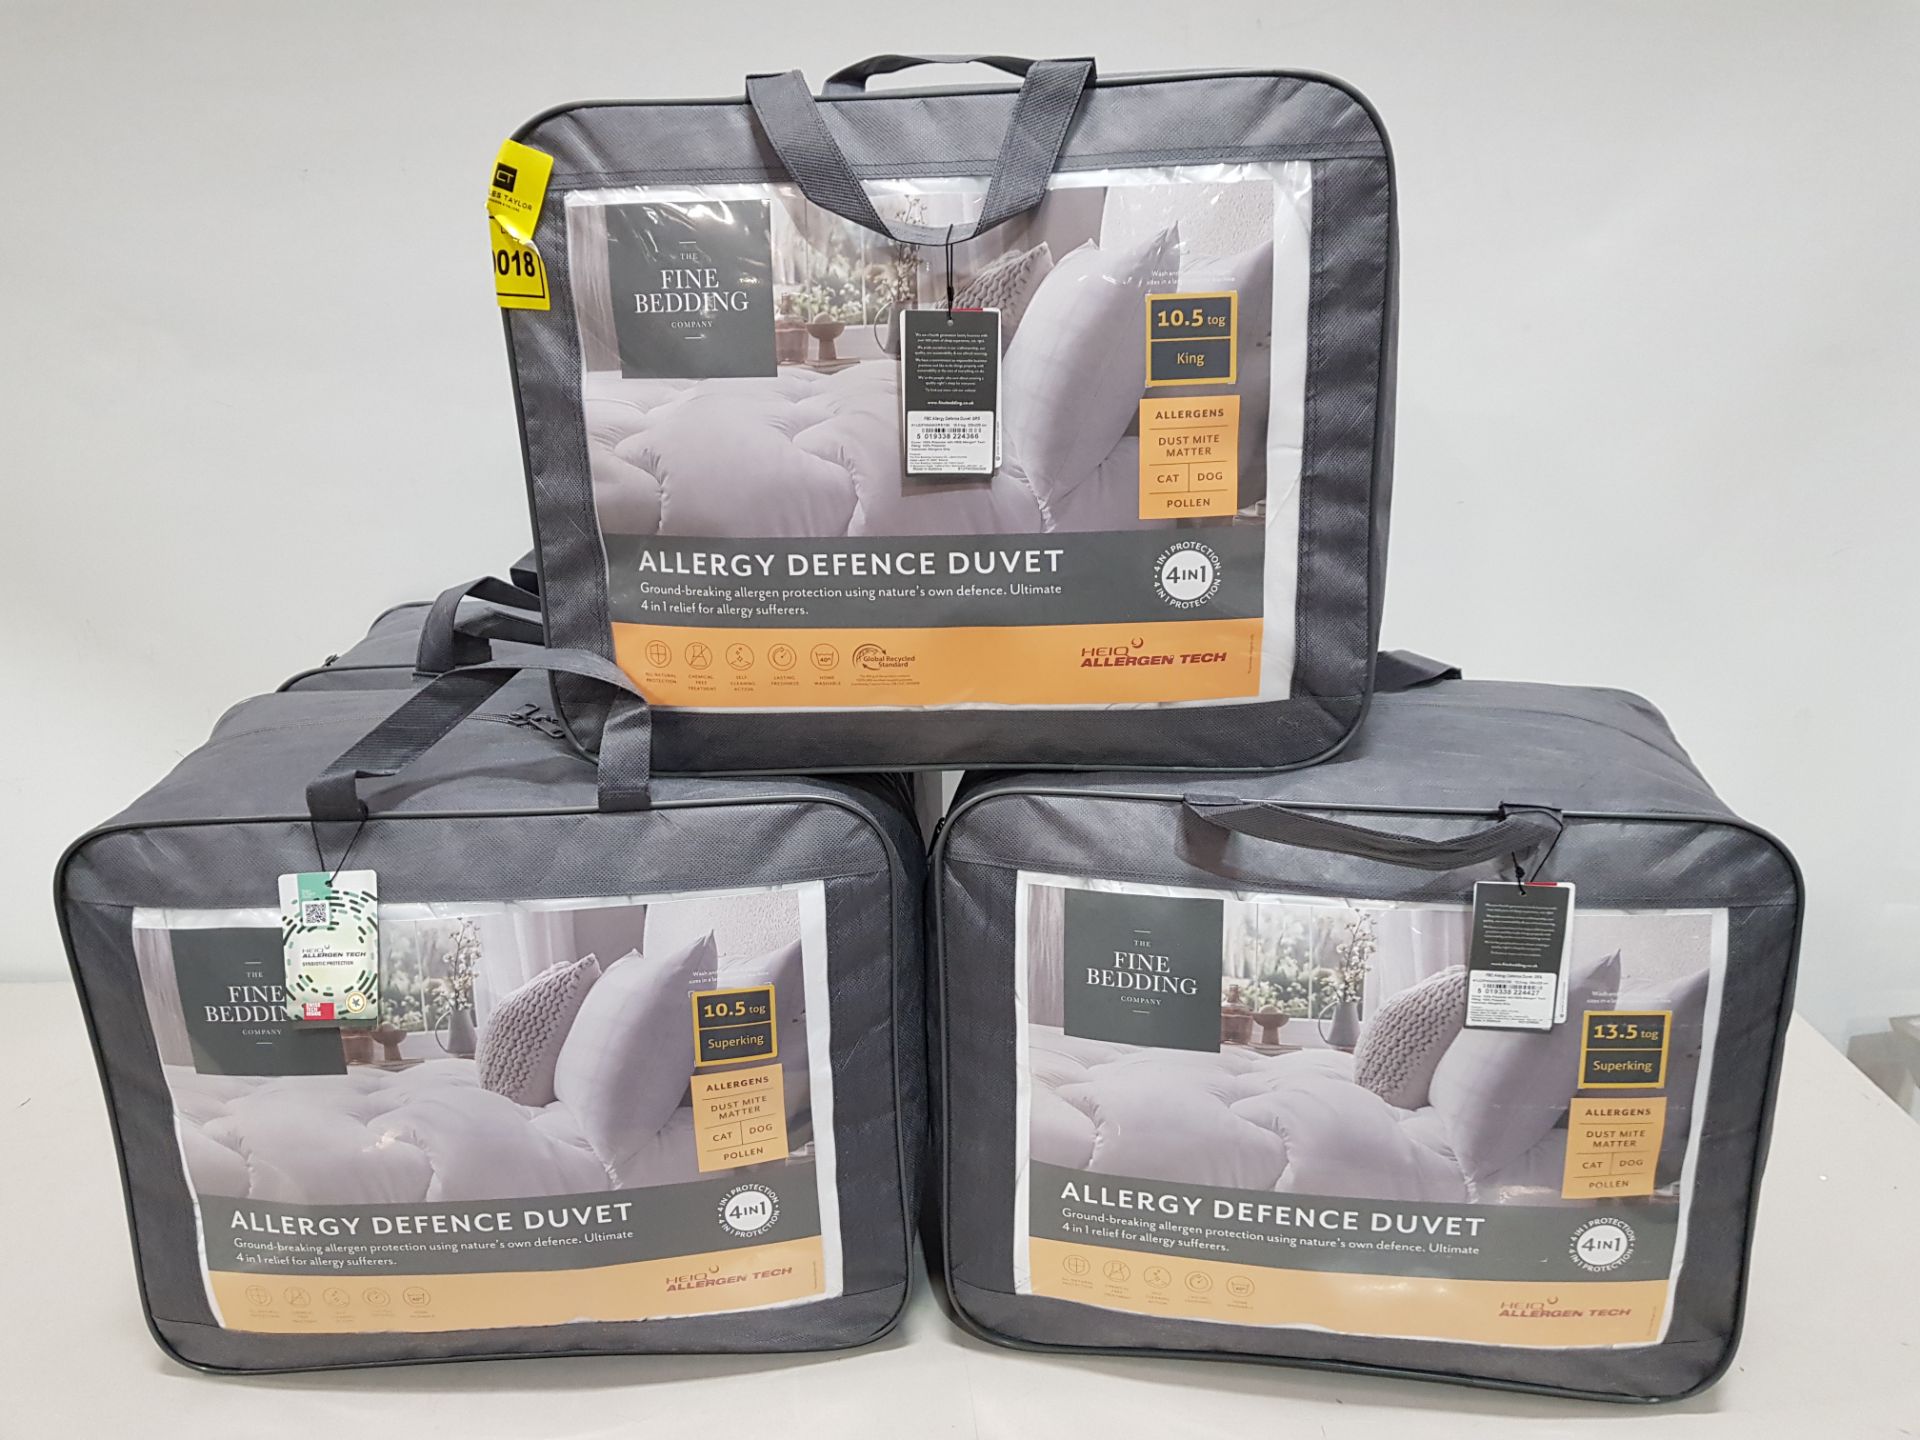 4 X BRAND NEW THE FINE BEDDING COMPANY ALLERGY DEFENCE DUVET'S THIS INCLUDES 2 KING SIZE 10.5